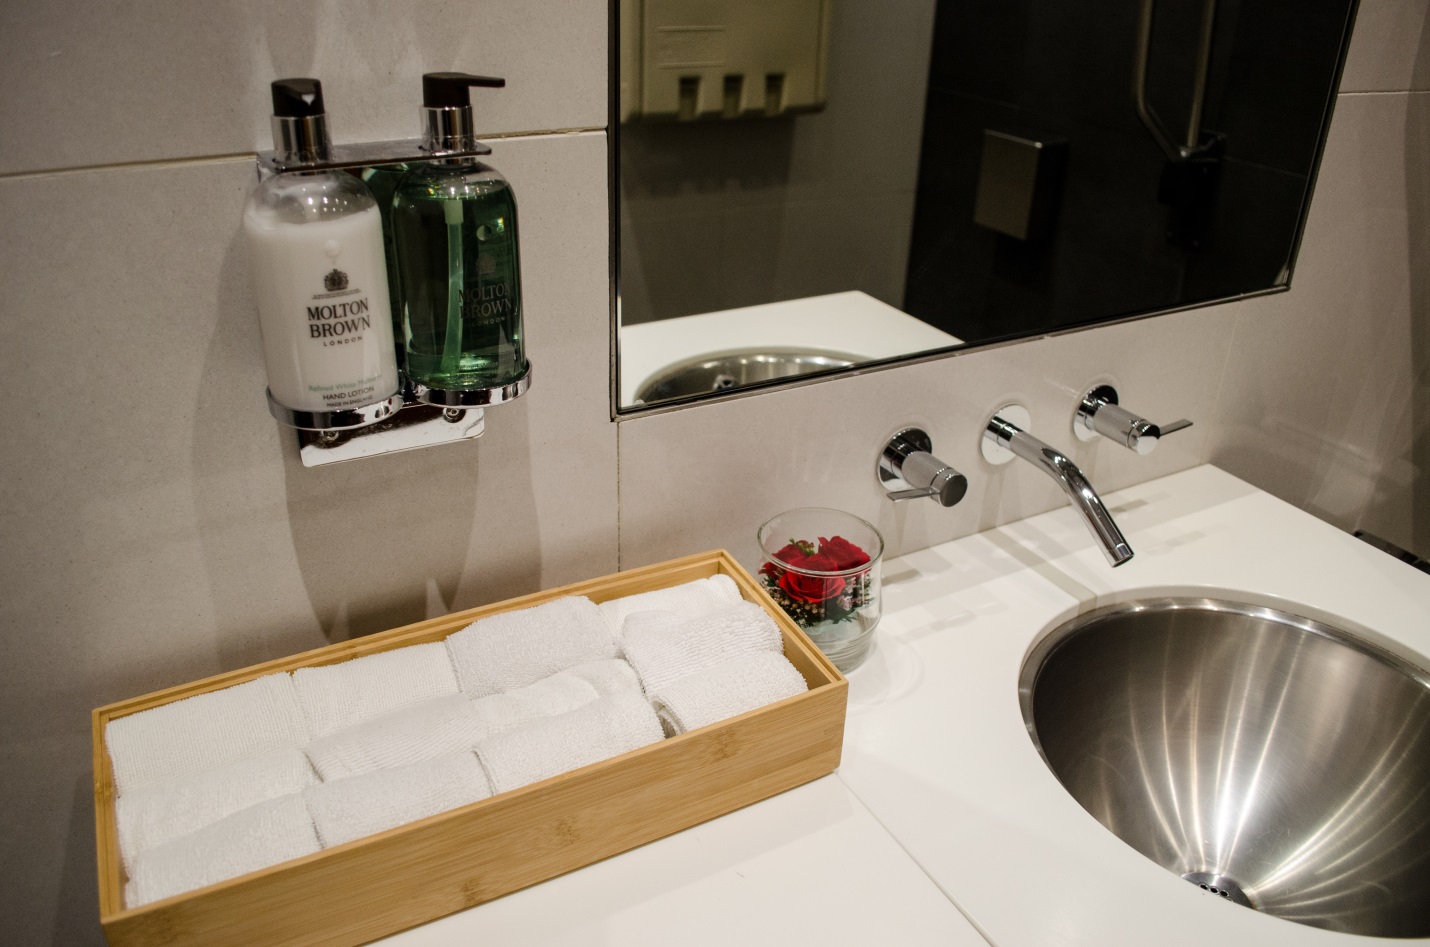 a bathroom sink with soap and soap dispenser